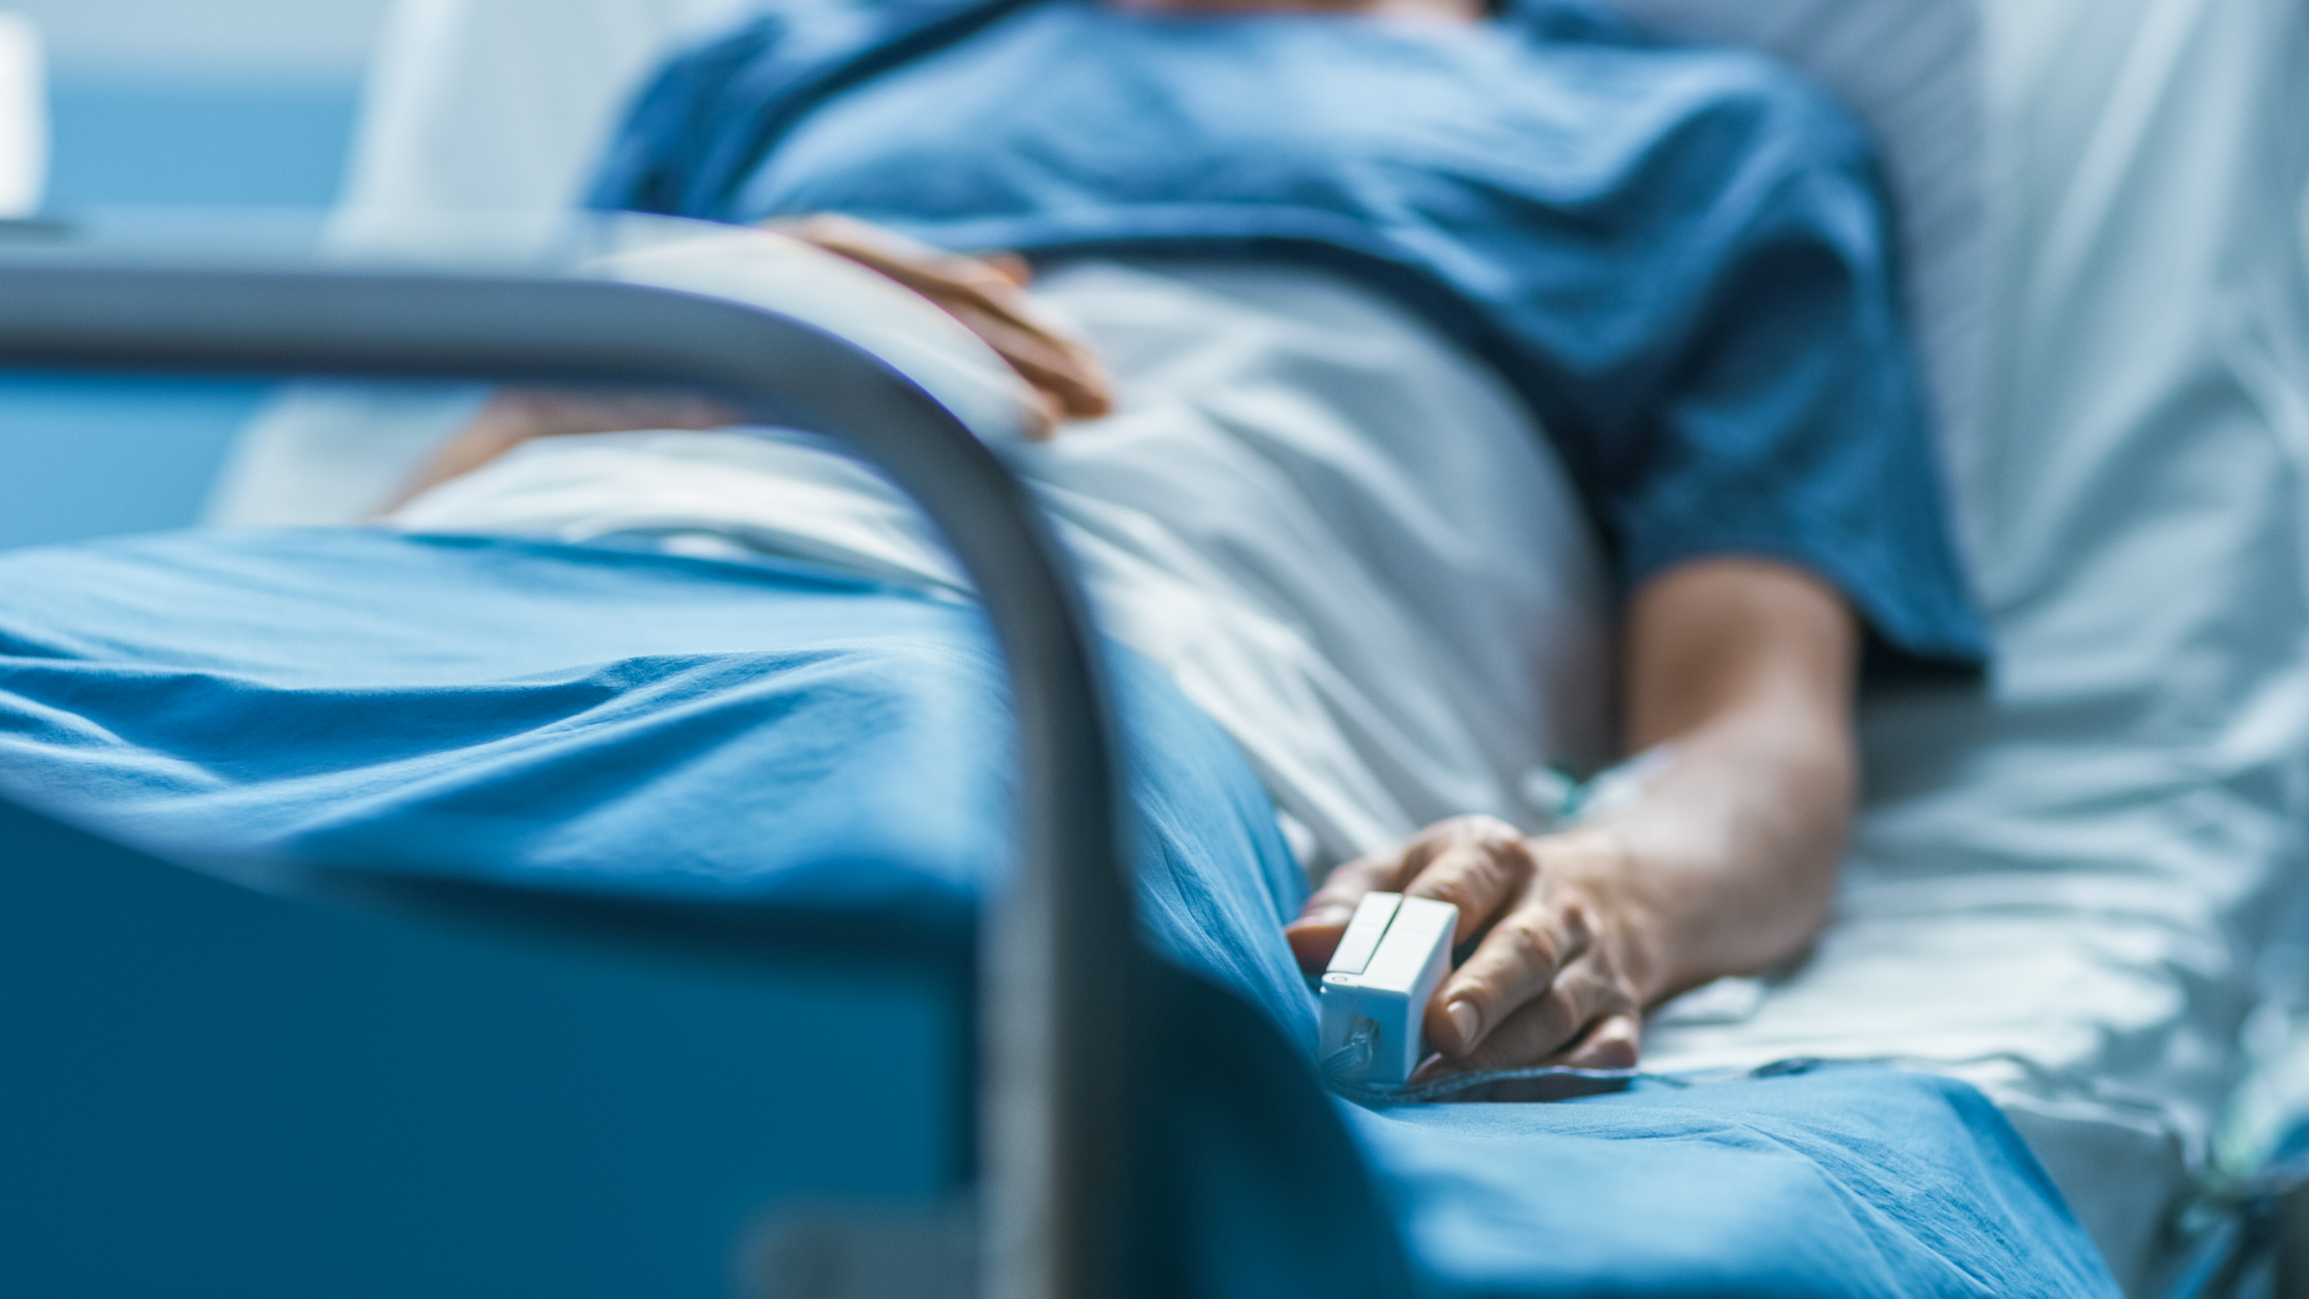 Stock image of patient in hospital bed